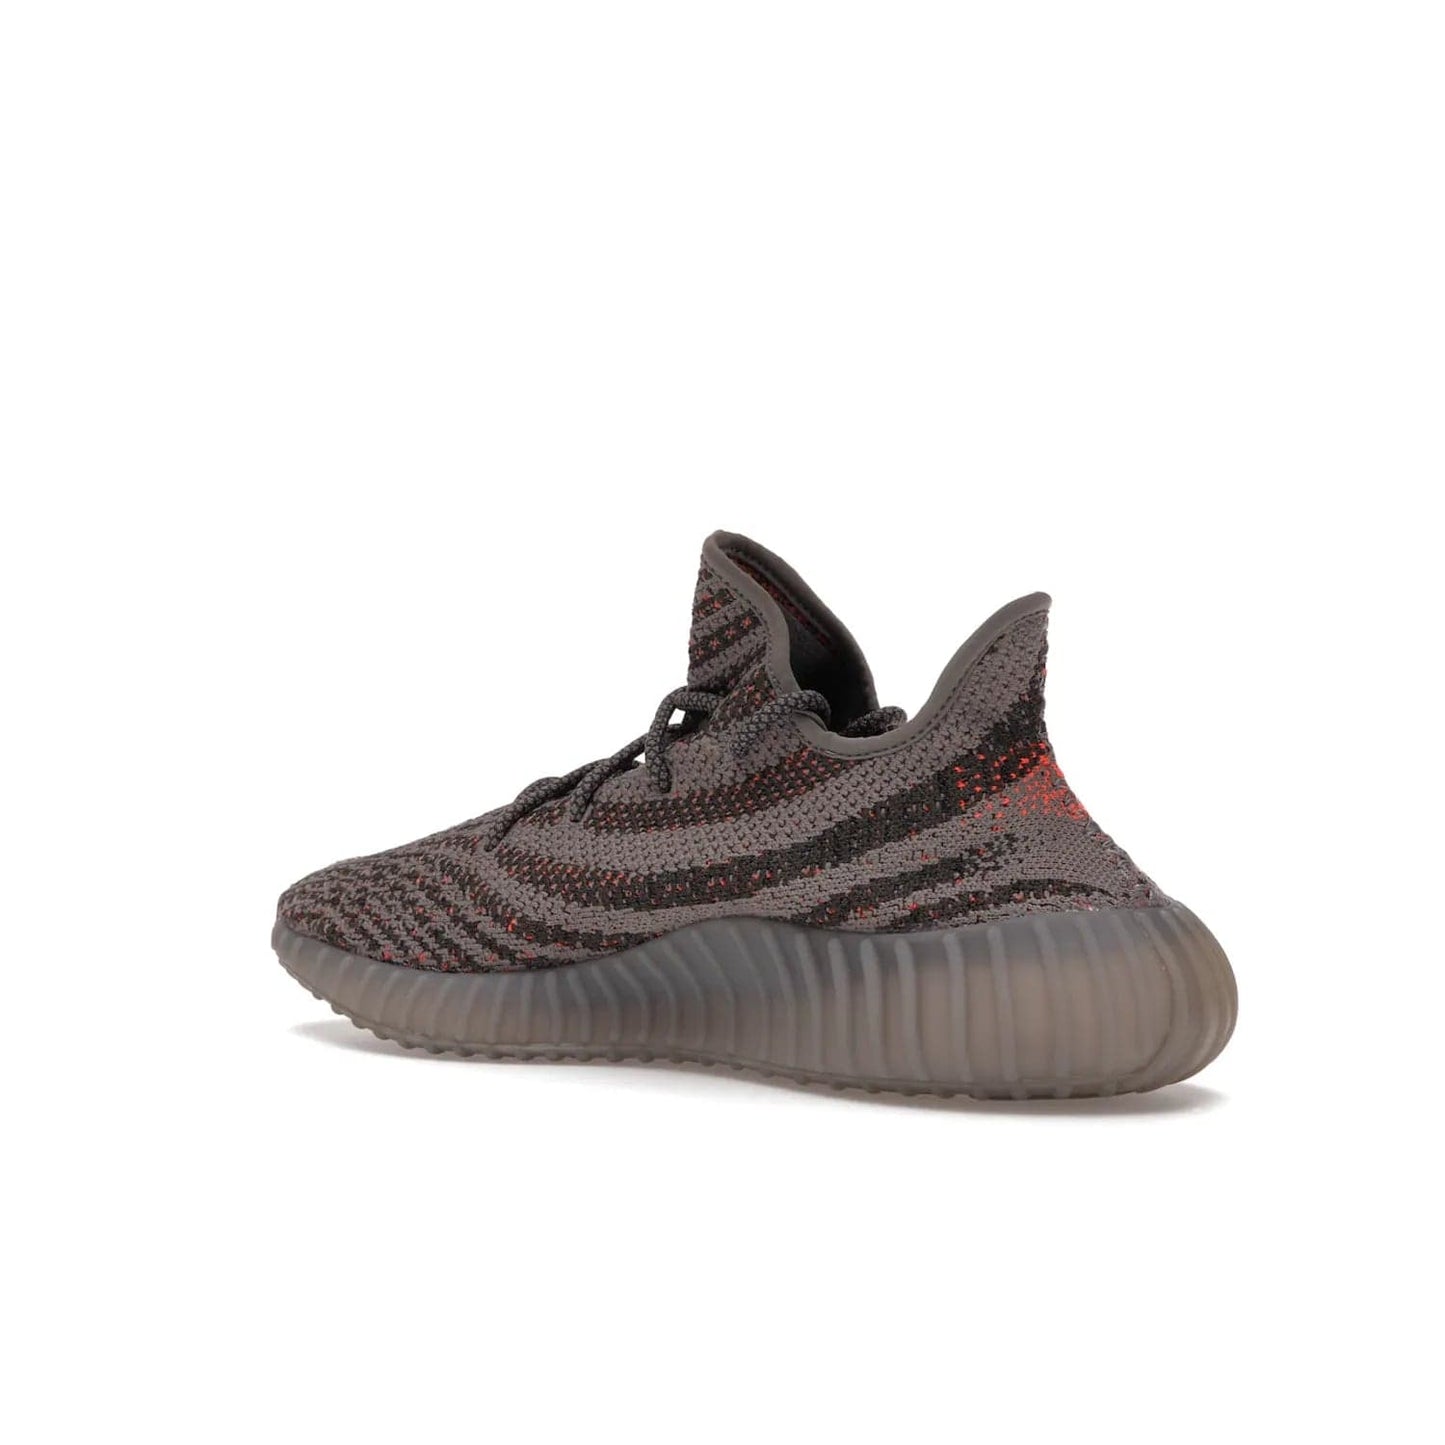 adidas Yeezy Boost 350 V2 Beluga Reflective - Image 23 - Only at www.BallersClubKickz.com - Shop the adidas Yeezy Boost 350 V2 Beluga Reflective: a stylish, reflective sneaker that stands out. Featuring Boost sole, Primeknit upper & signature orange stripe. Available Dec 2021.